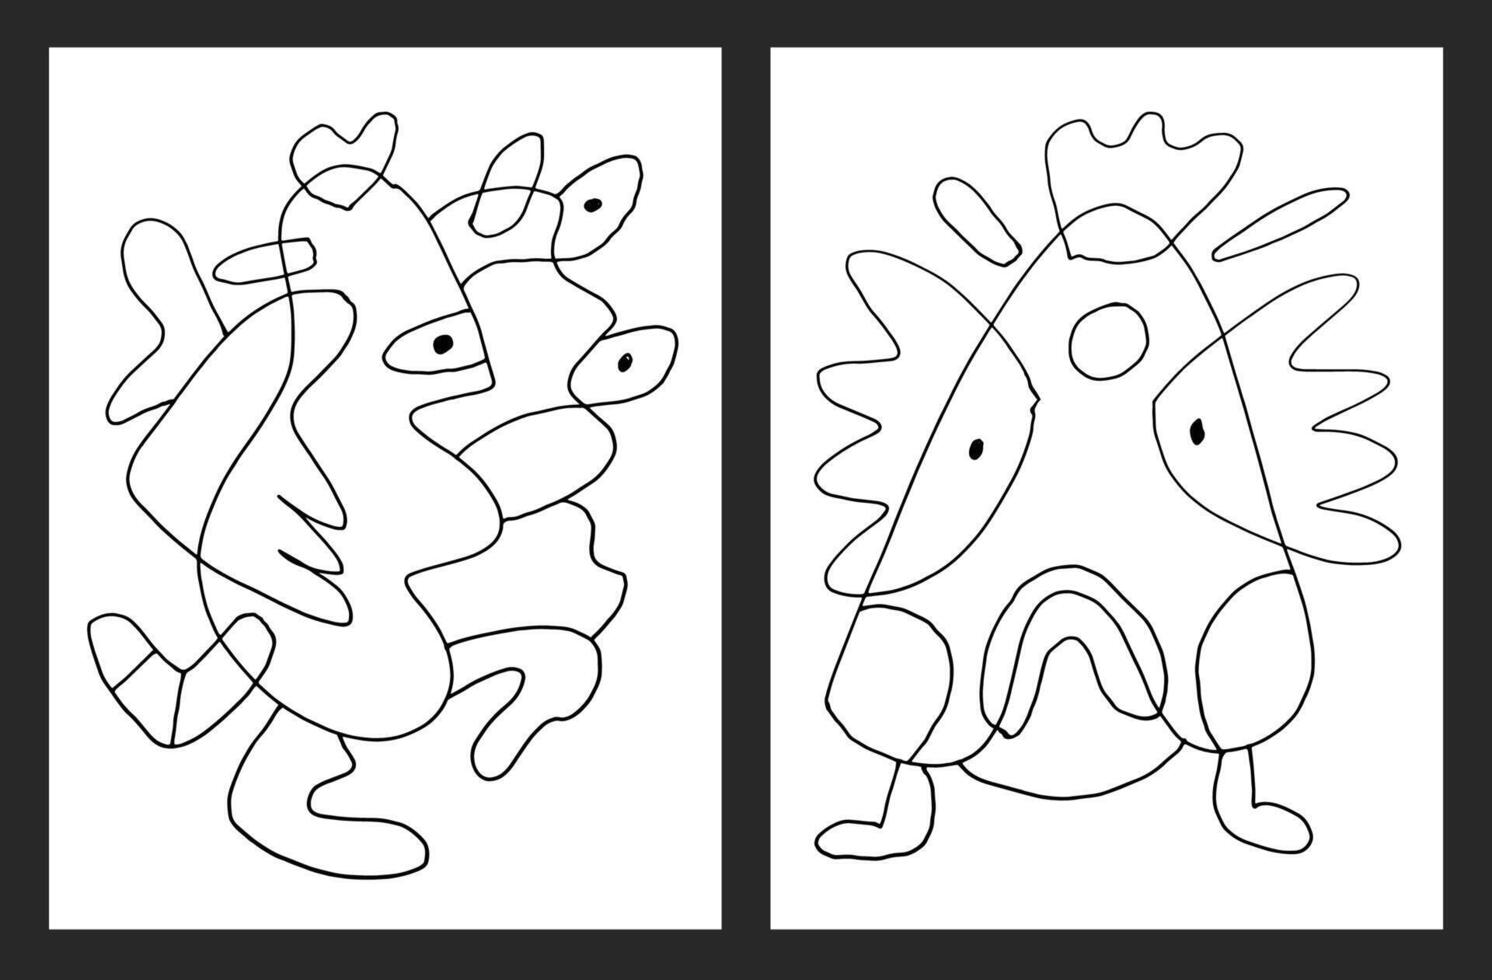 Doodle drawing coloring pages and book for children vector